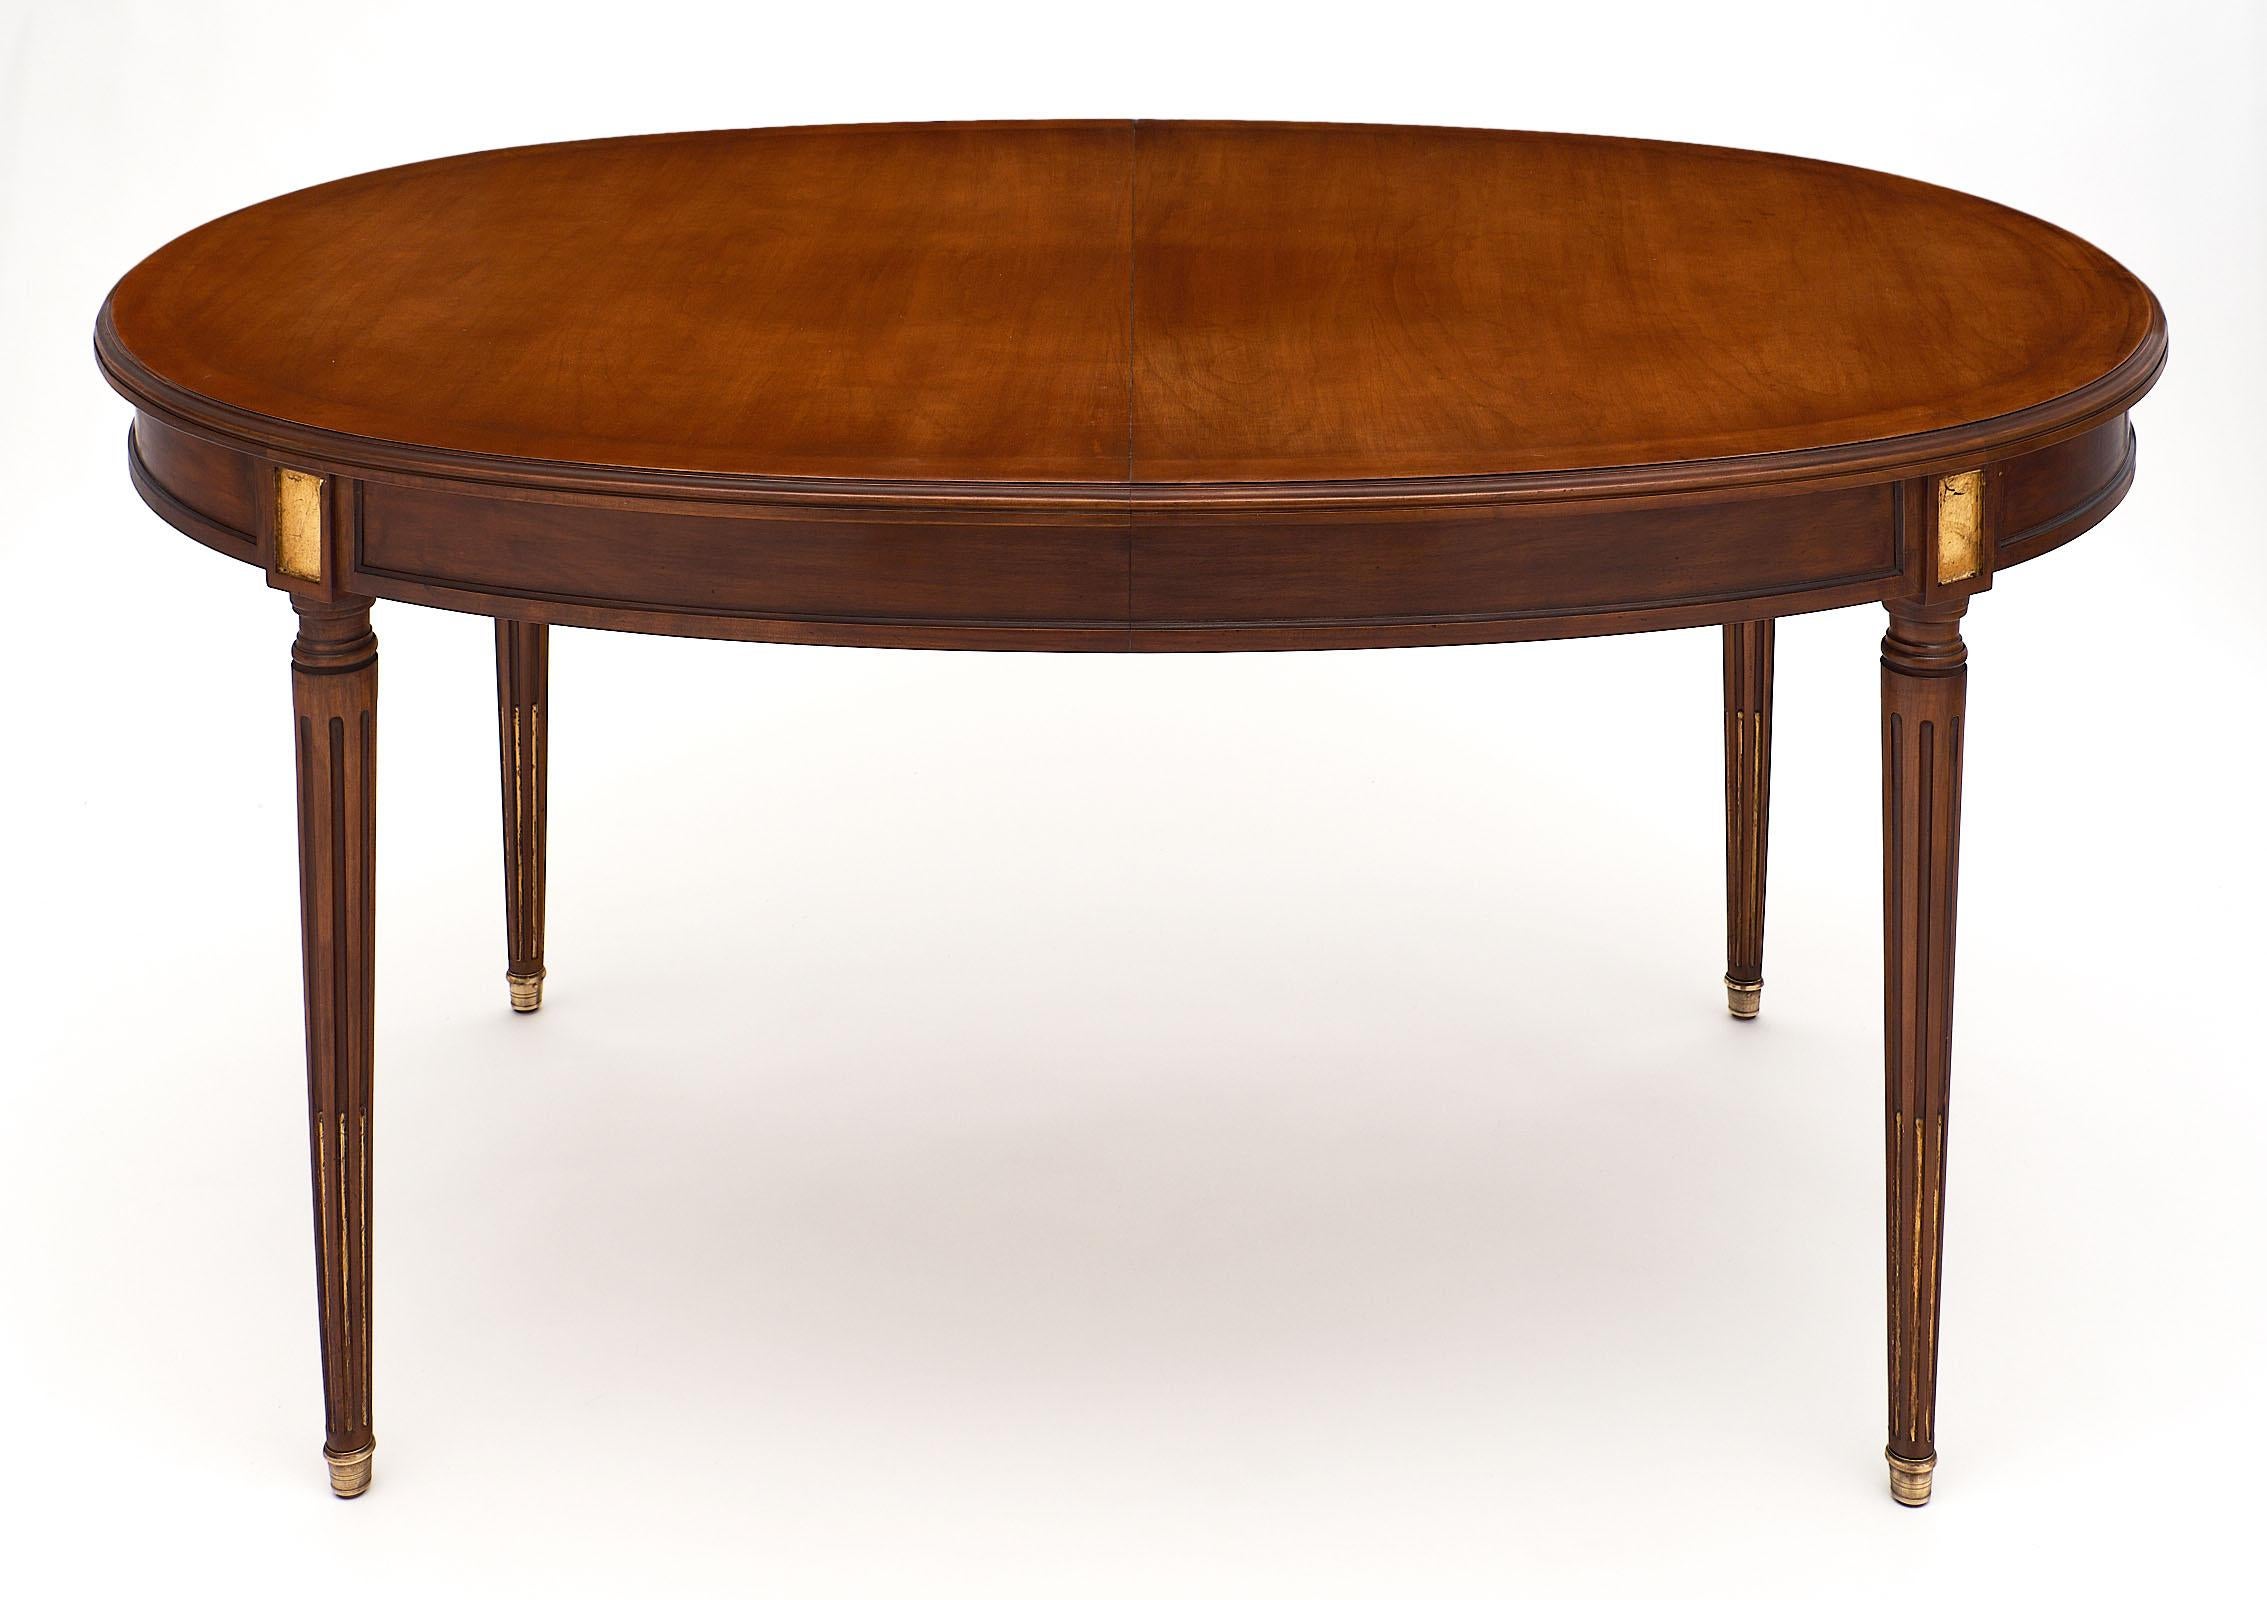 Louis XVI style antique mahogany dining table featuring an oval shape and gold leaf detail. We love the long, tapered legs and bronze feet. This table has been finished with a natural wax. The table does open for additional leaves, though we do not